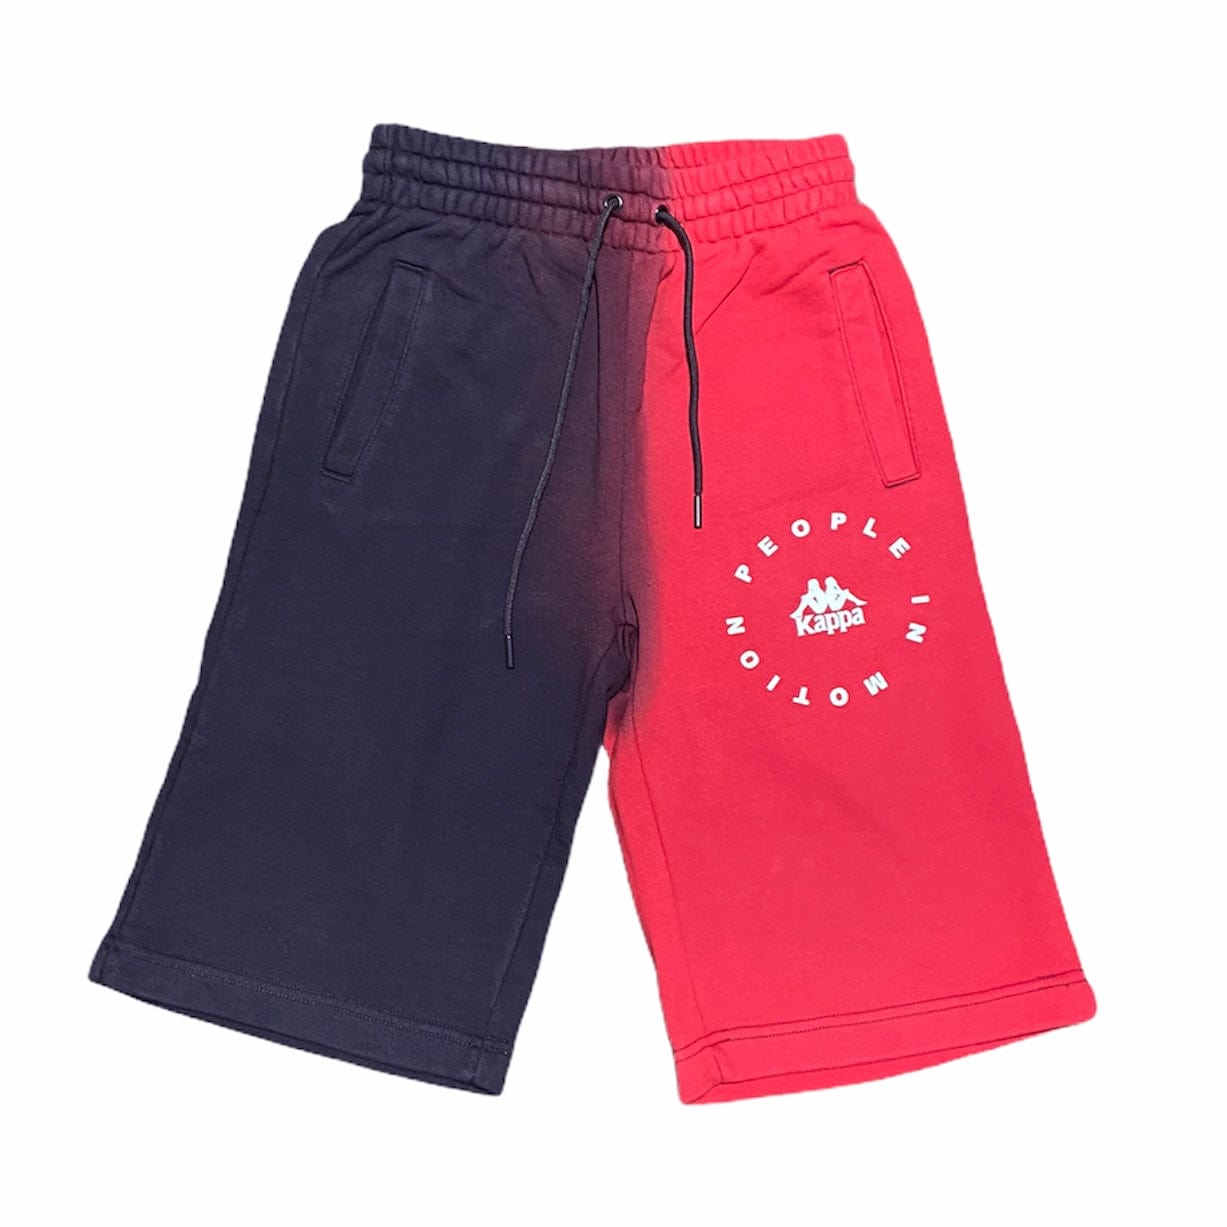 Berrie Man Kappa (Red/Blue/White) 36161CW USA Authentic - City – Shorts